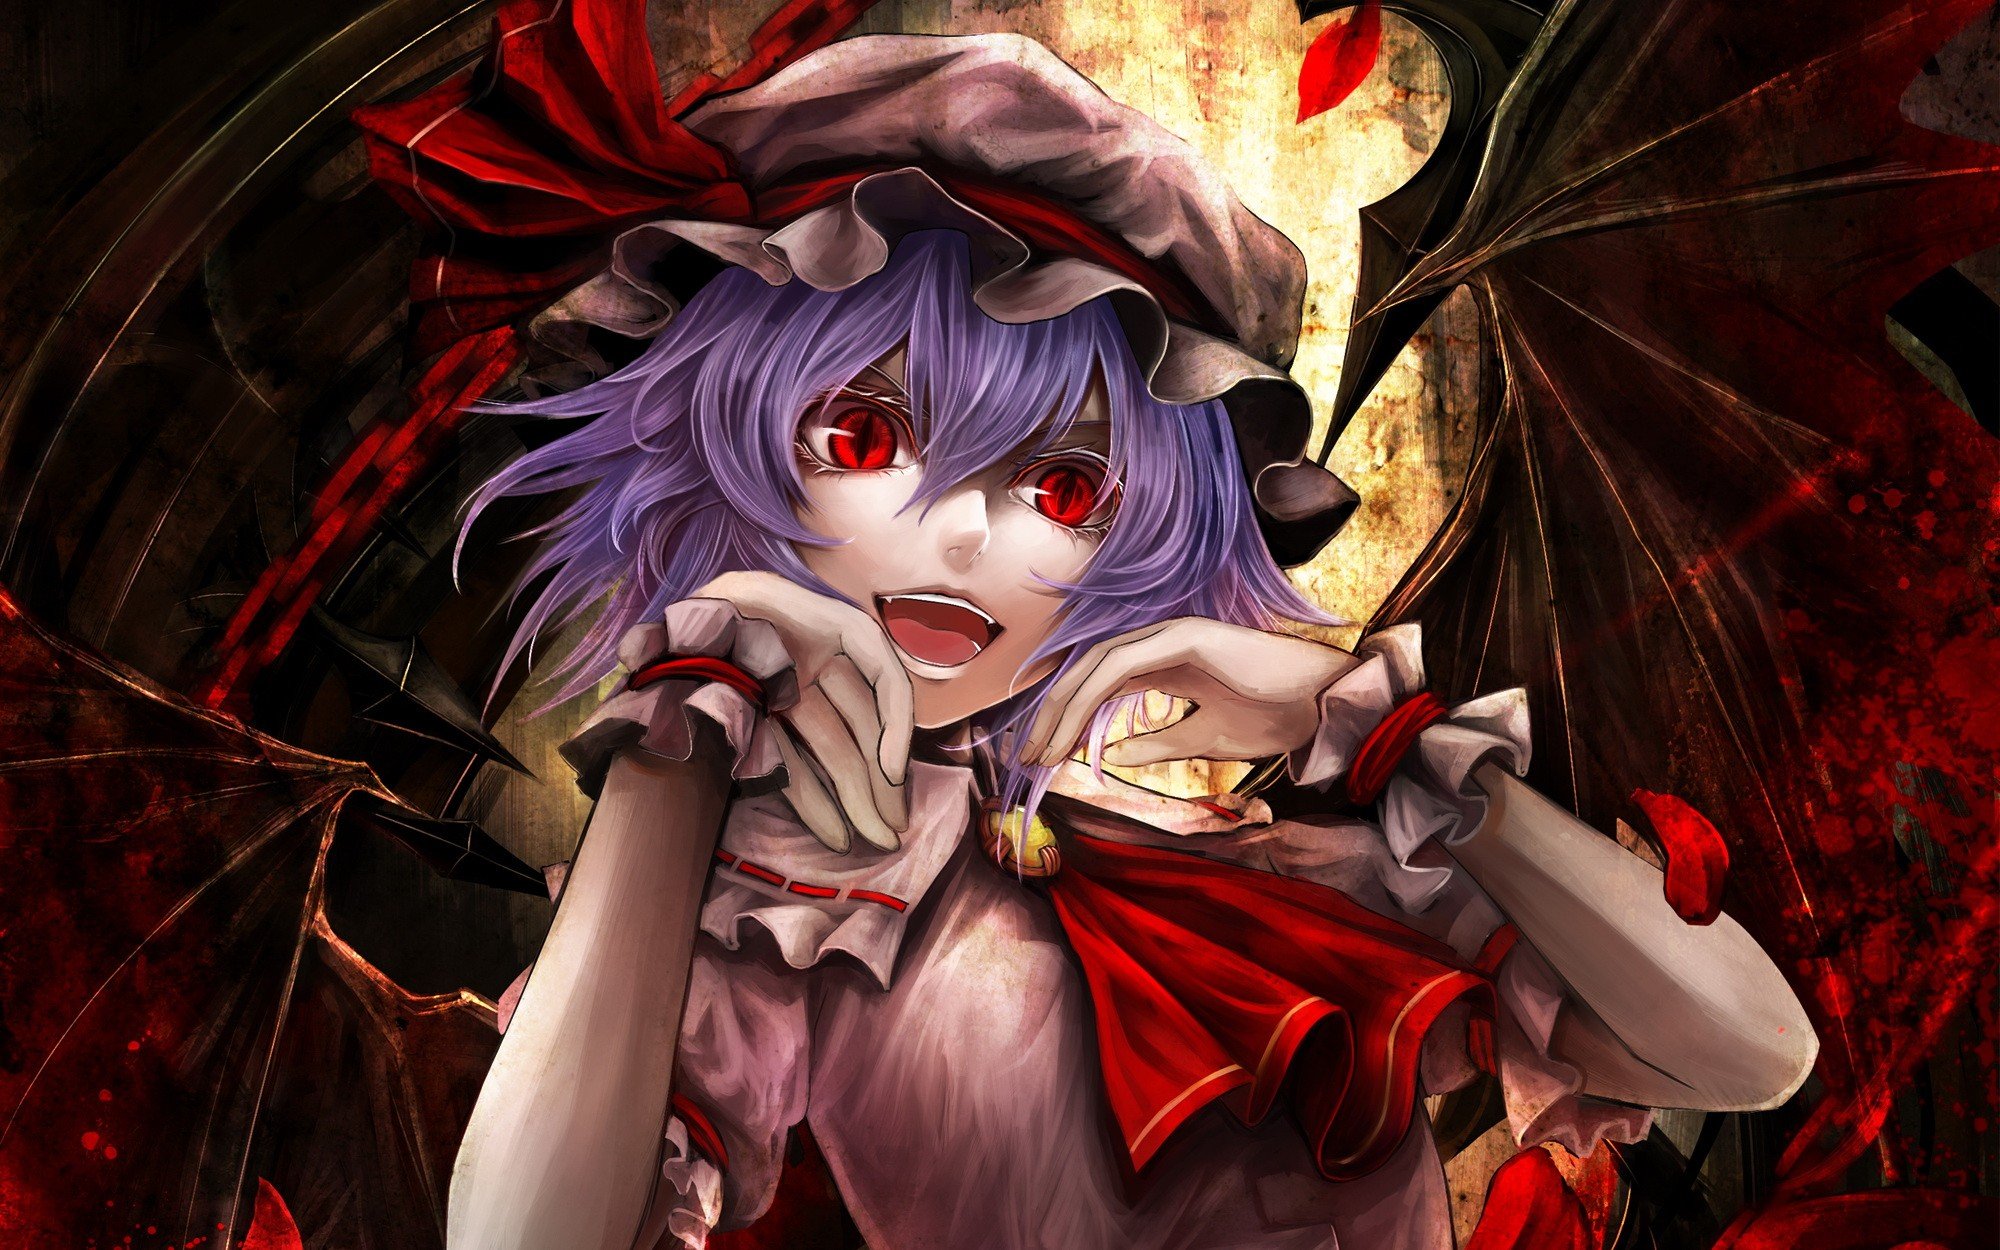 video, Games, Touhou, Wings, Vampires, Purple, Hair, Red, Eyes, Short, Hair, Open, Mouth, Chains, Flower, Petals, Cuffs, Hats, Pink, Dress, Remilia, Scarlet, Slit, Pupils Wallpaper